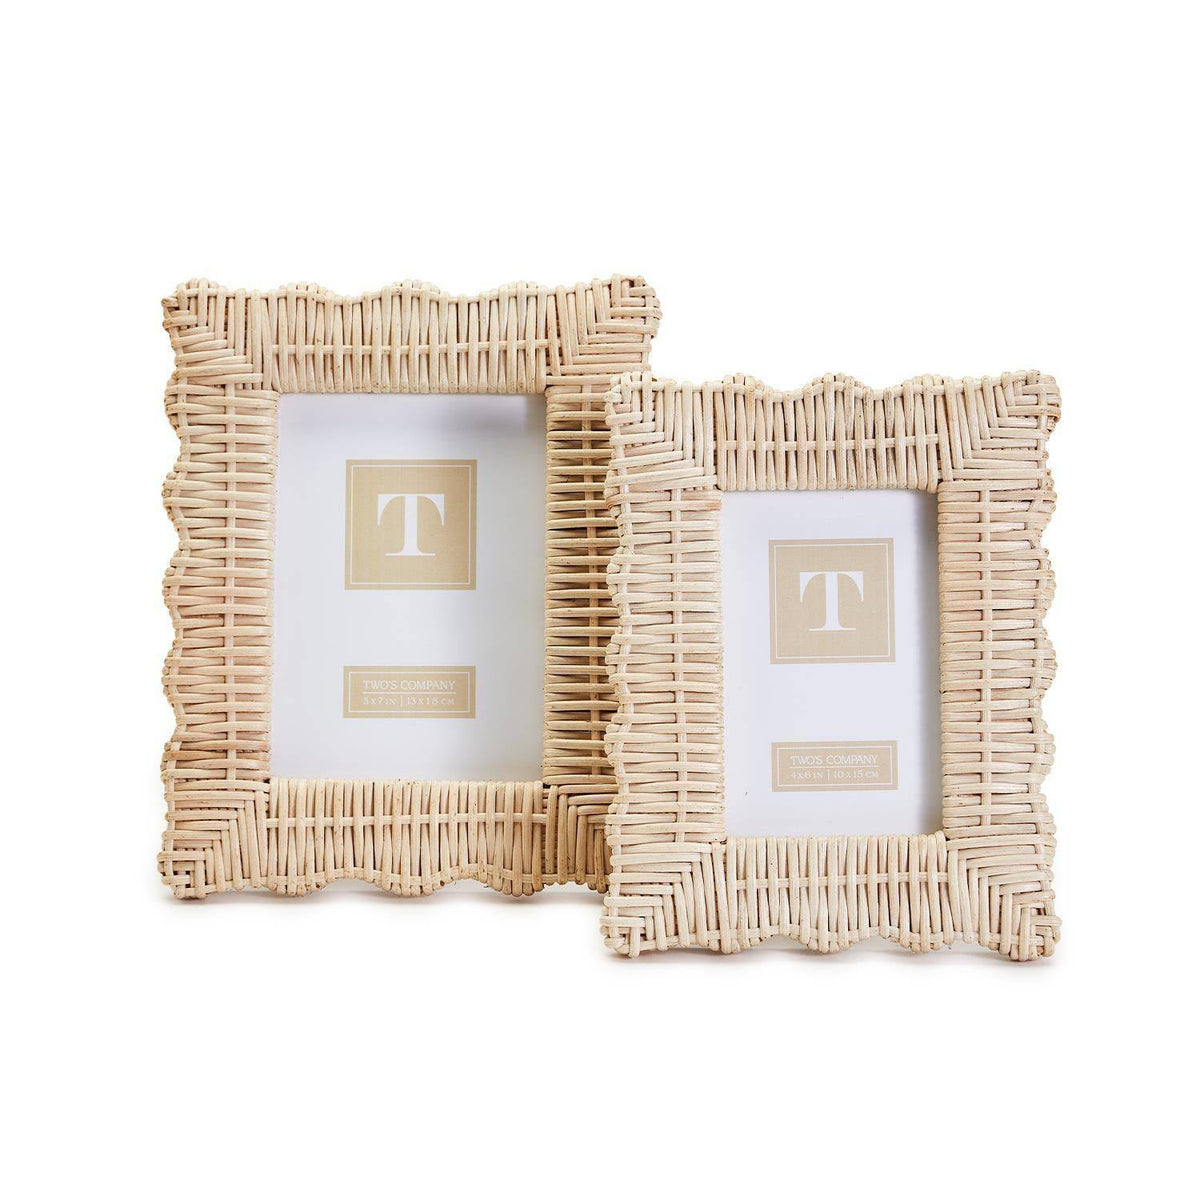 Wicker Weave Picture Frame - 2 sizes available - The Preppy Bunny